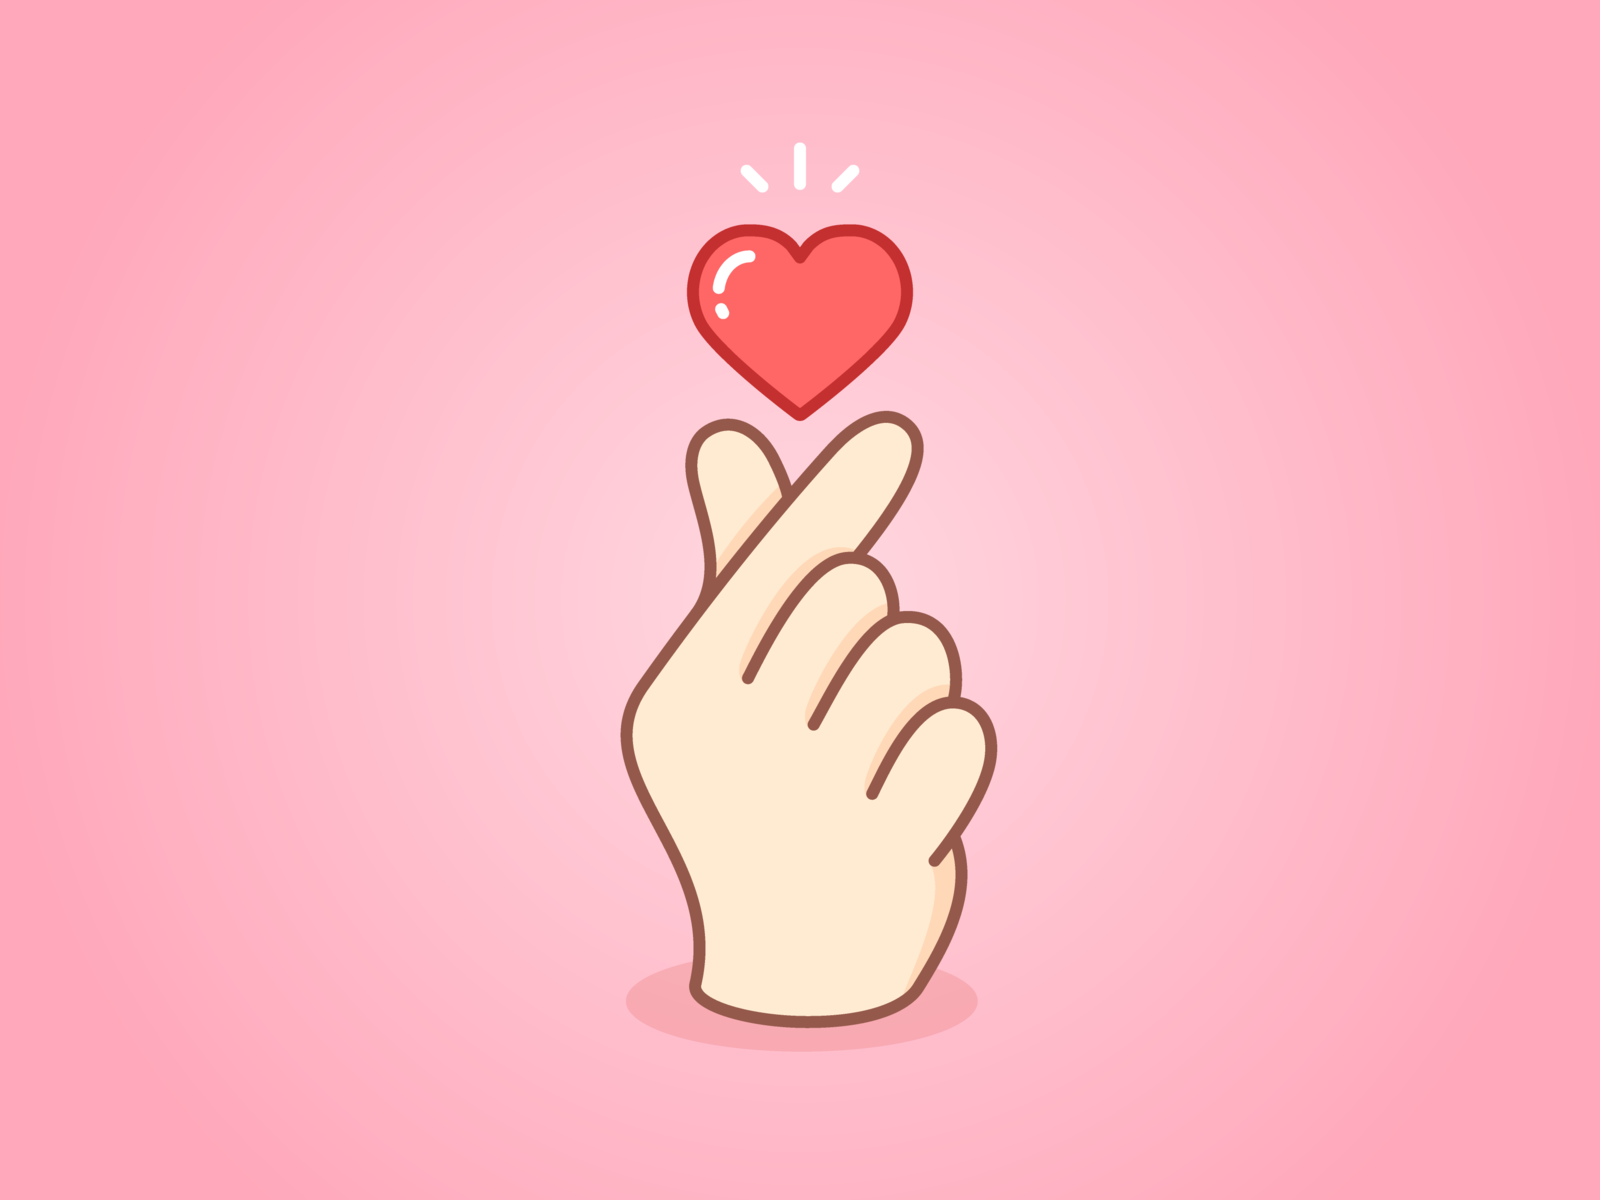 finger heart by marc louis rosario on dribbble finger heart by marc louis rosario on